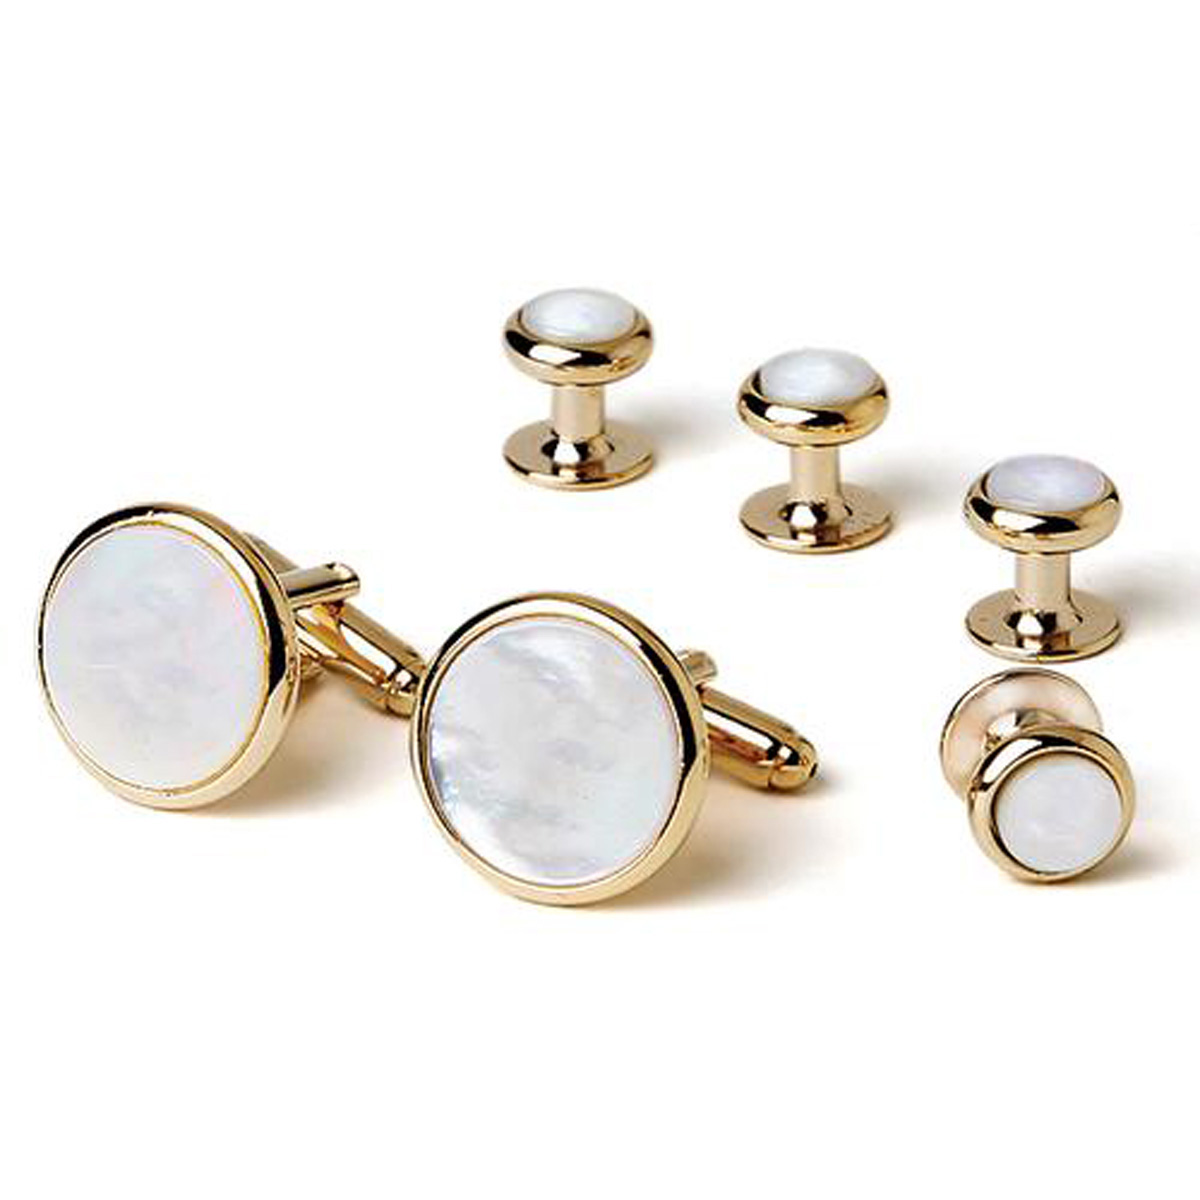 Genuine Mother of Pearl Tuxedo Cufflinks and Studs Gold